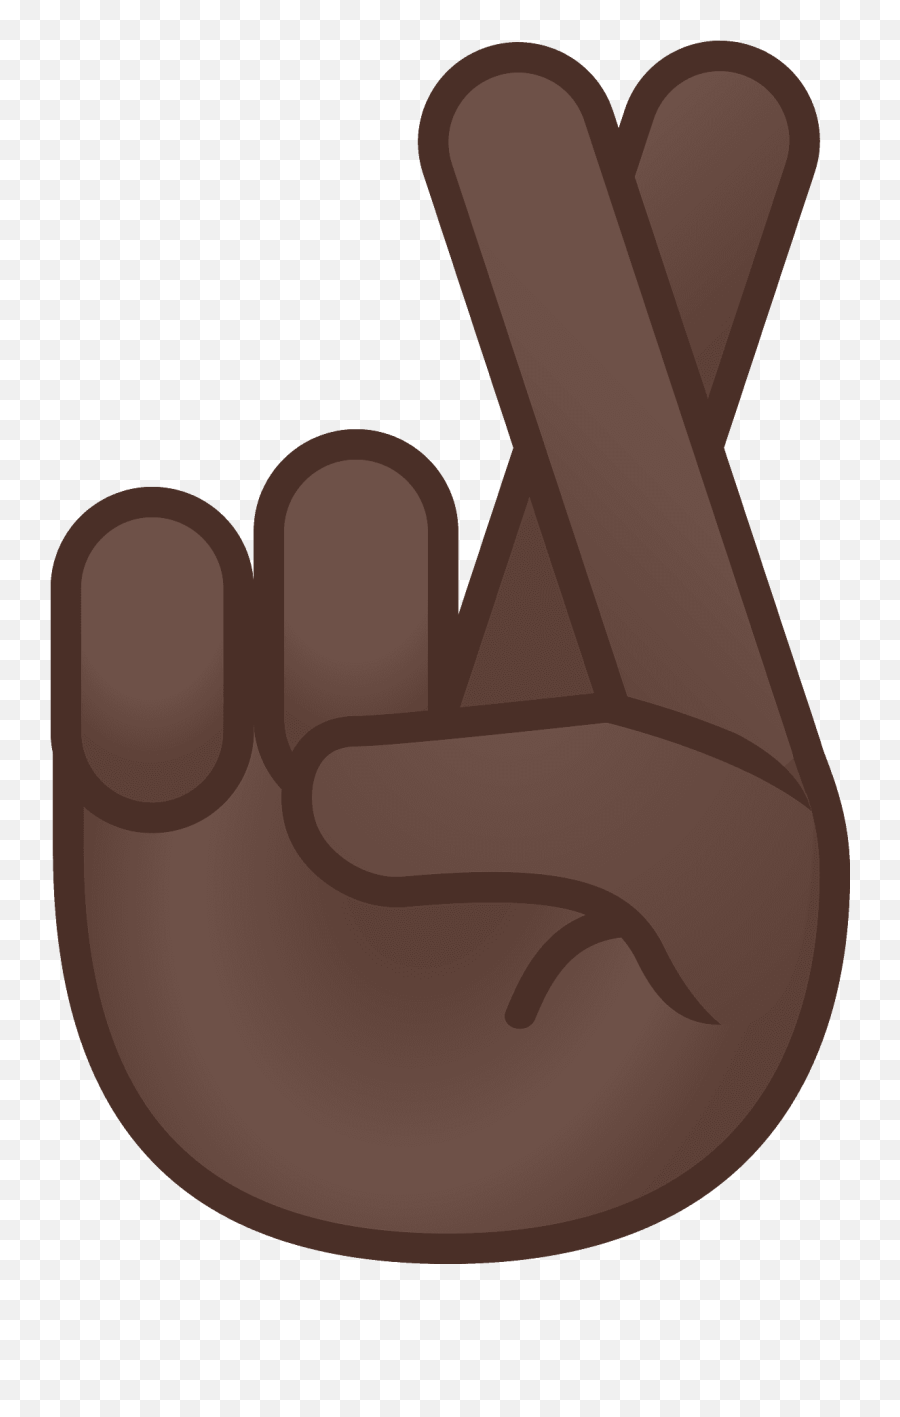 Crossed Fingers Emoji Clipart Free Download Transparent,Light Brown Skin Emoticon Meaning